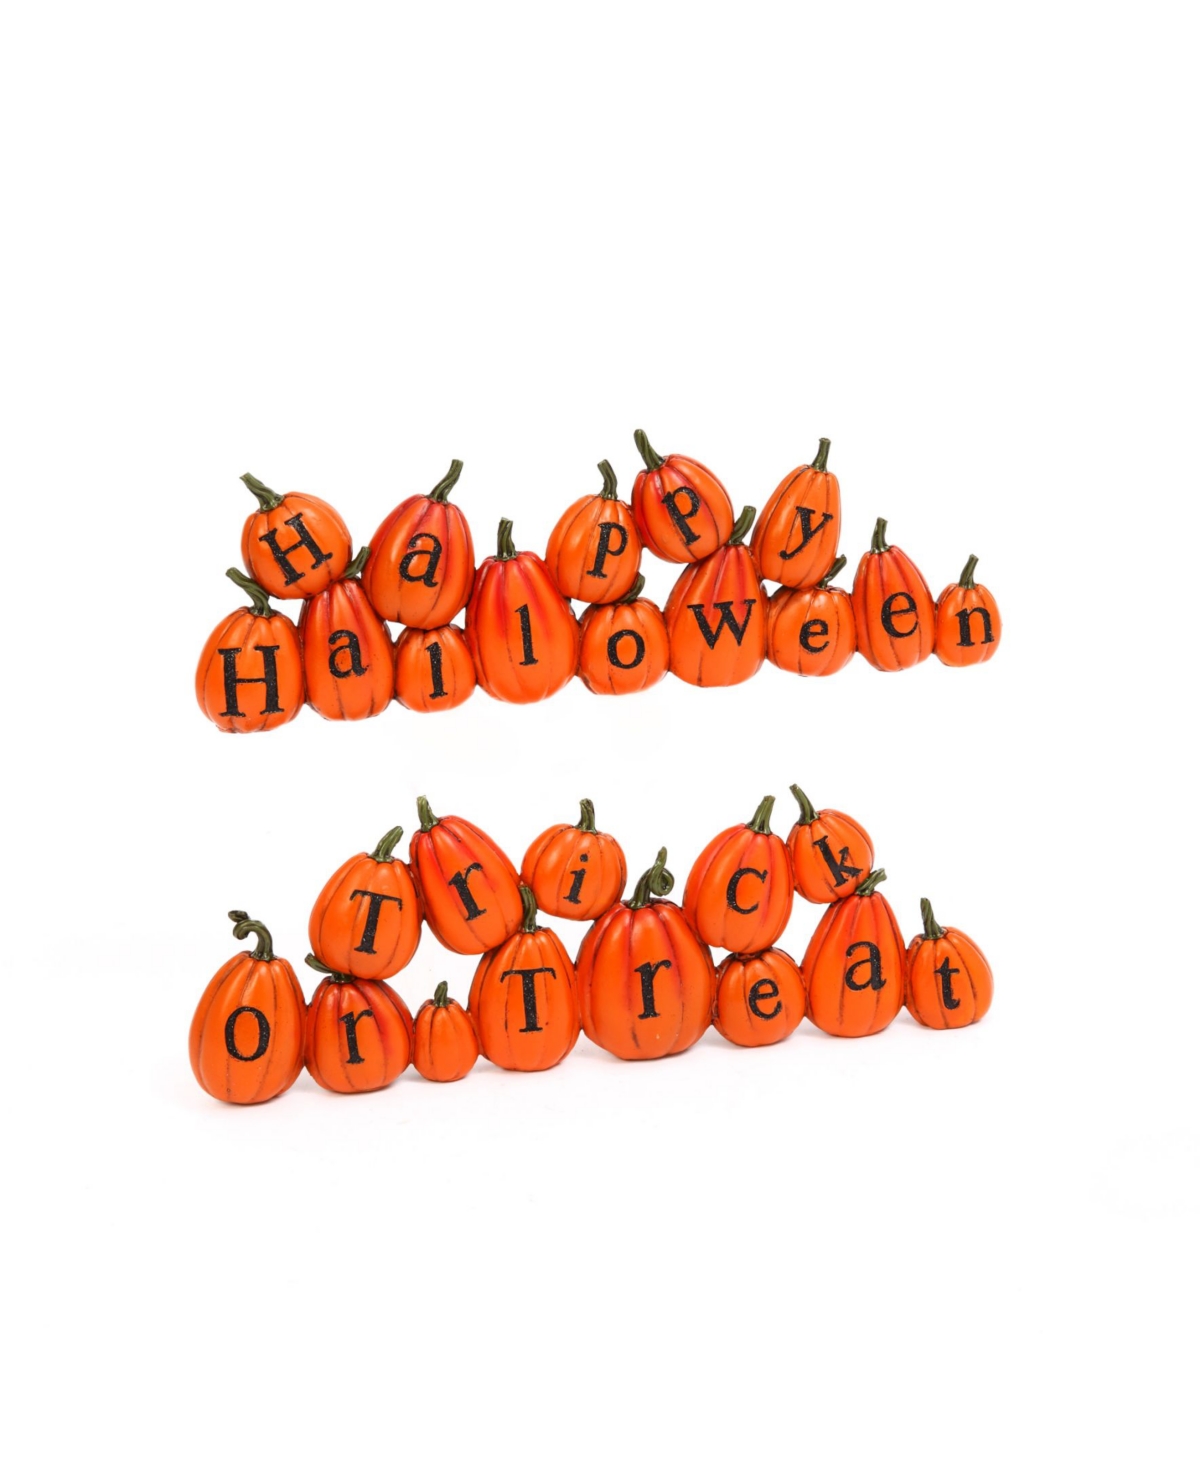 13.78" Long Pumpkins Perched Askew Spelling Out Halloween Messages Holiday Decor Set, 2 Pieces - Orange